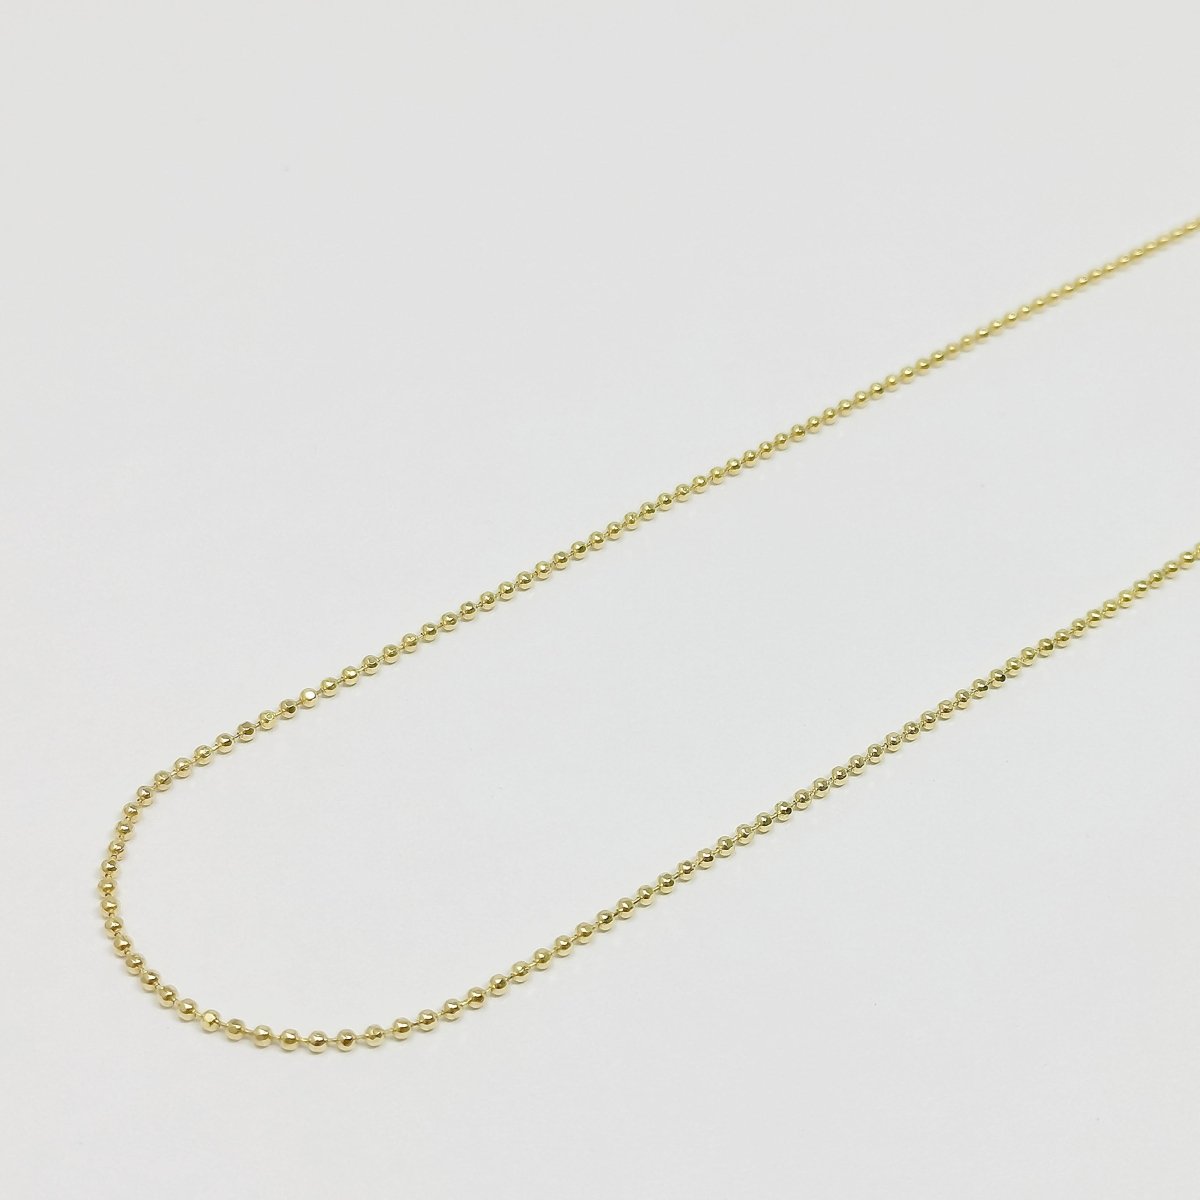 1.3mm Ball Beads Chain, 24K Gold Filled Chain By Yard, Round Bead Chain For DIY Jewelry Making, Bracelet Necklace Component Supply | ROLL-357 Clearance Pricing - DLUXCA